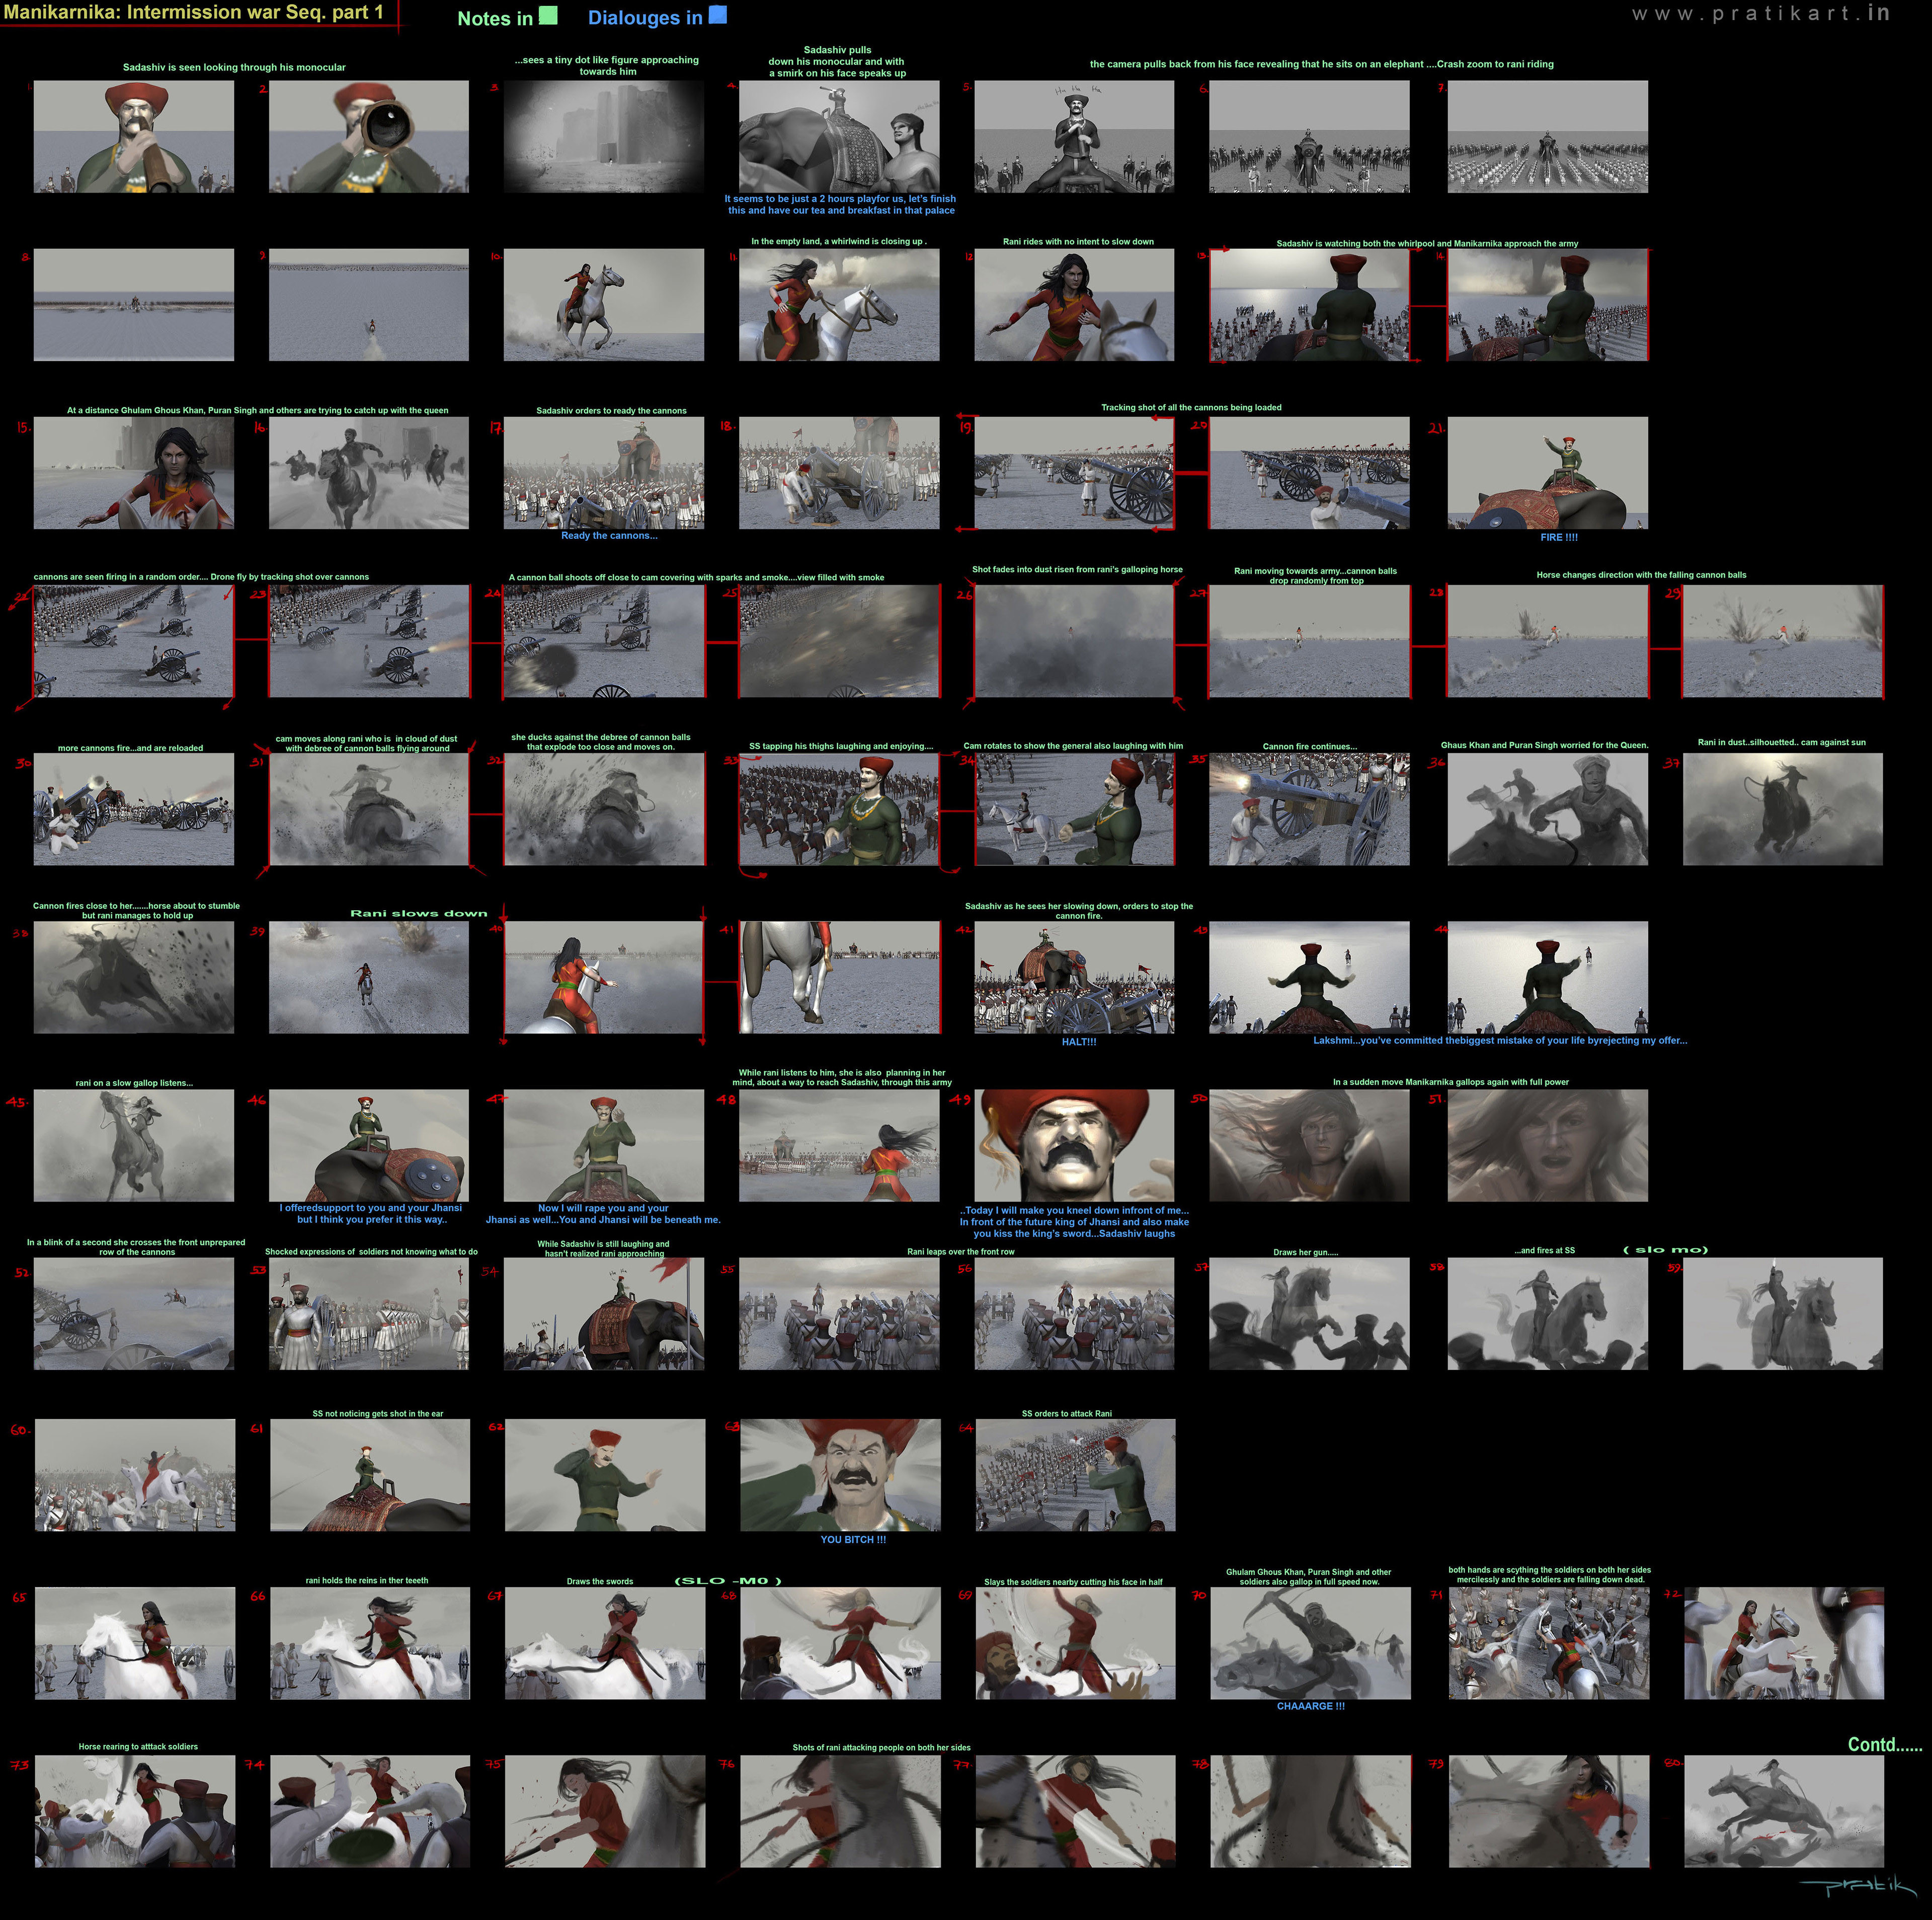 Story Boards of war sequence for the film Manikarnika Part 1